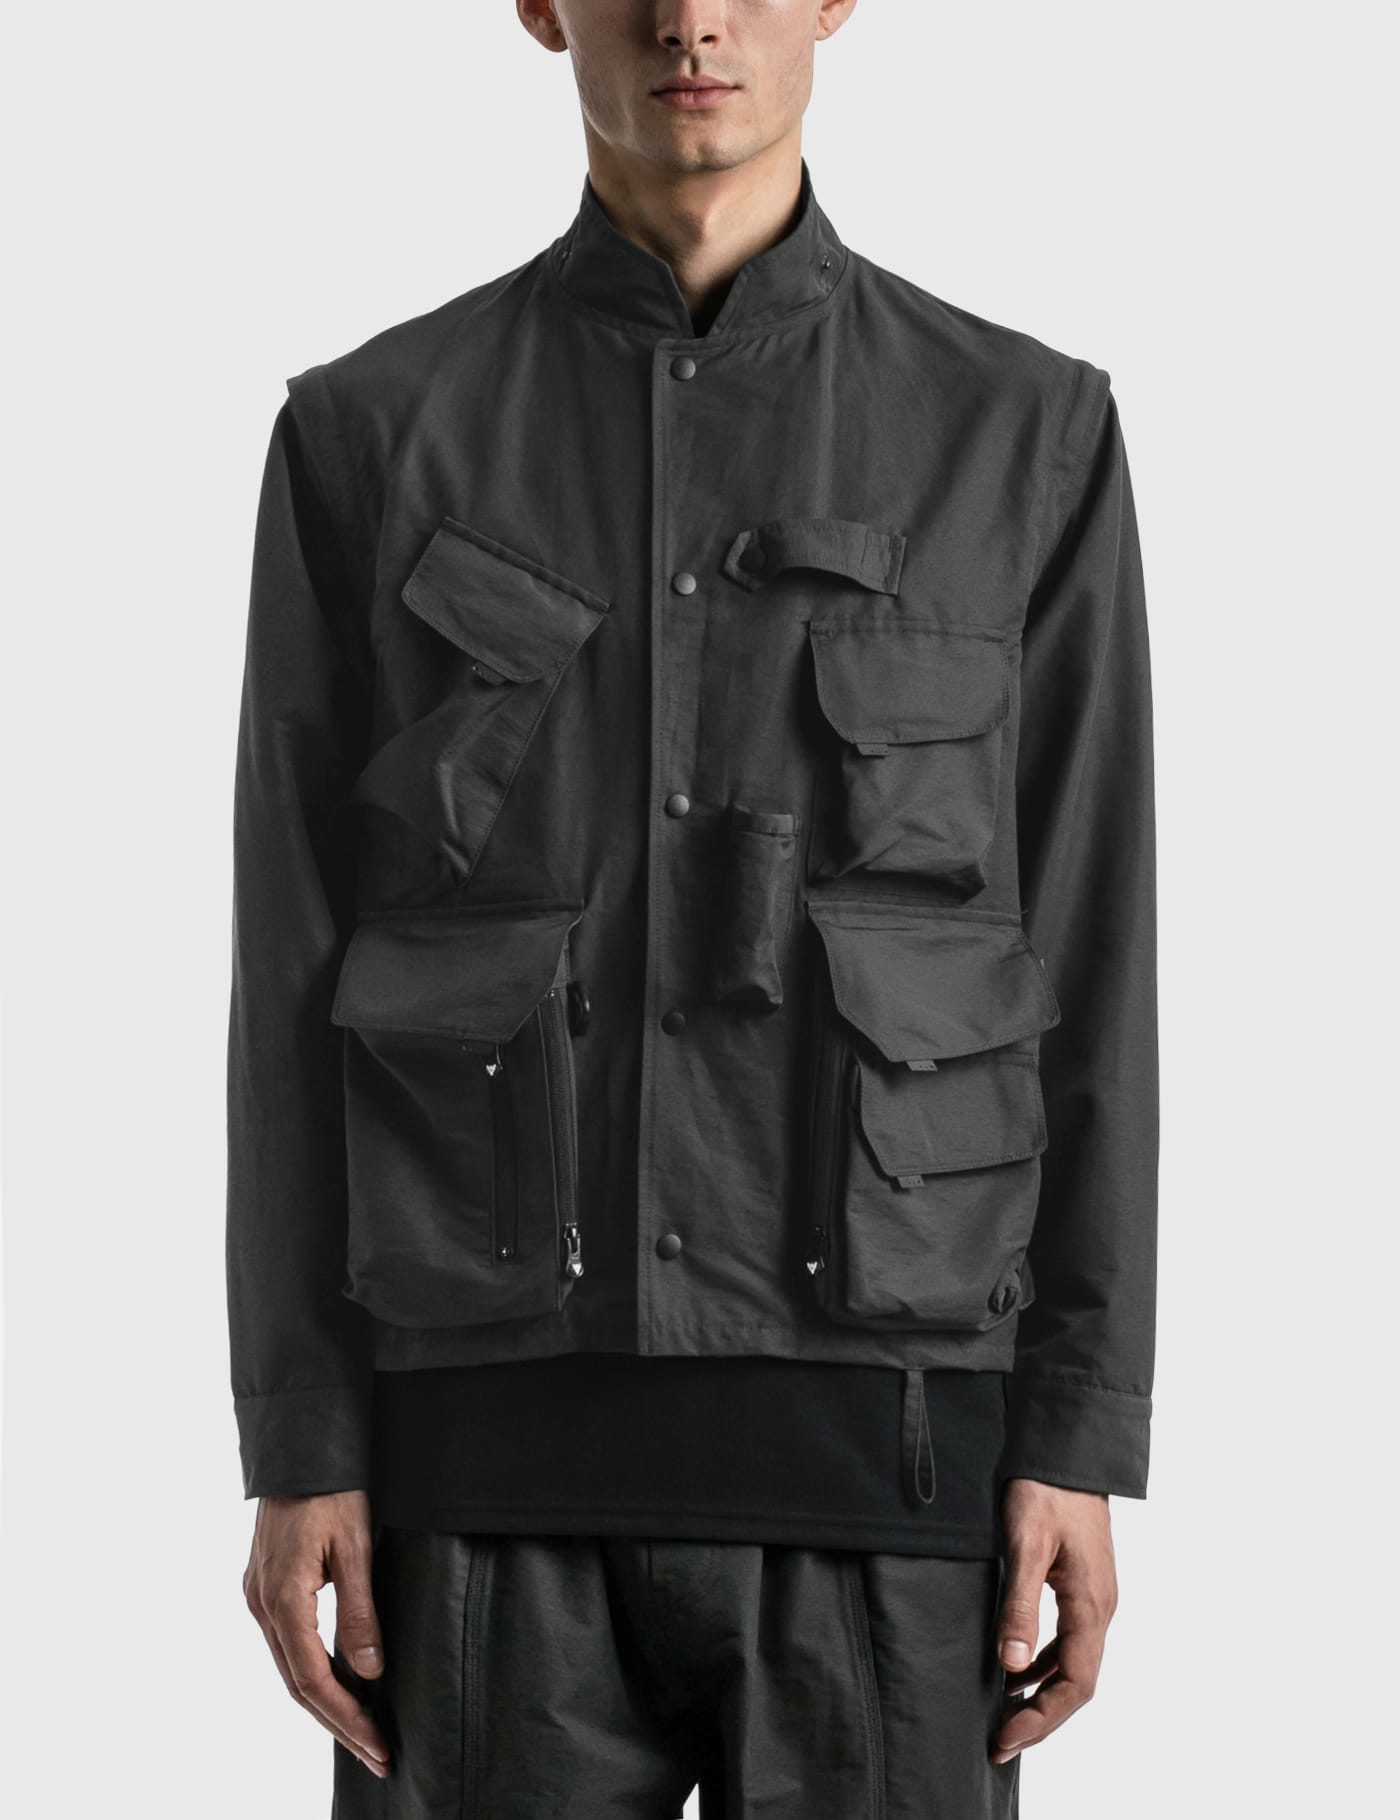 South2 West8 - Tenkara Parka | HBX - Globally Curated Fashion and